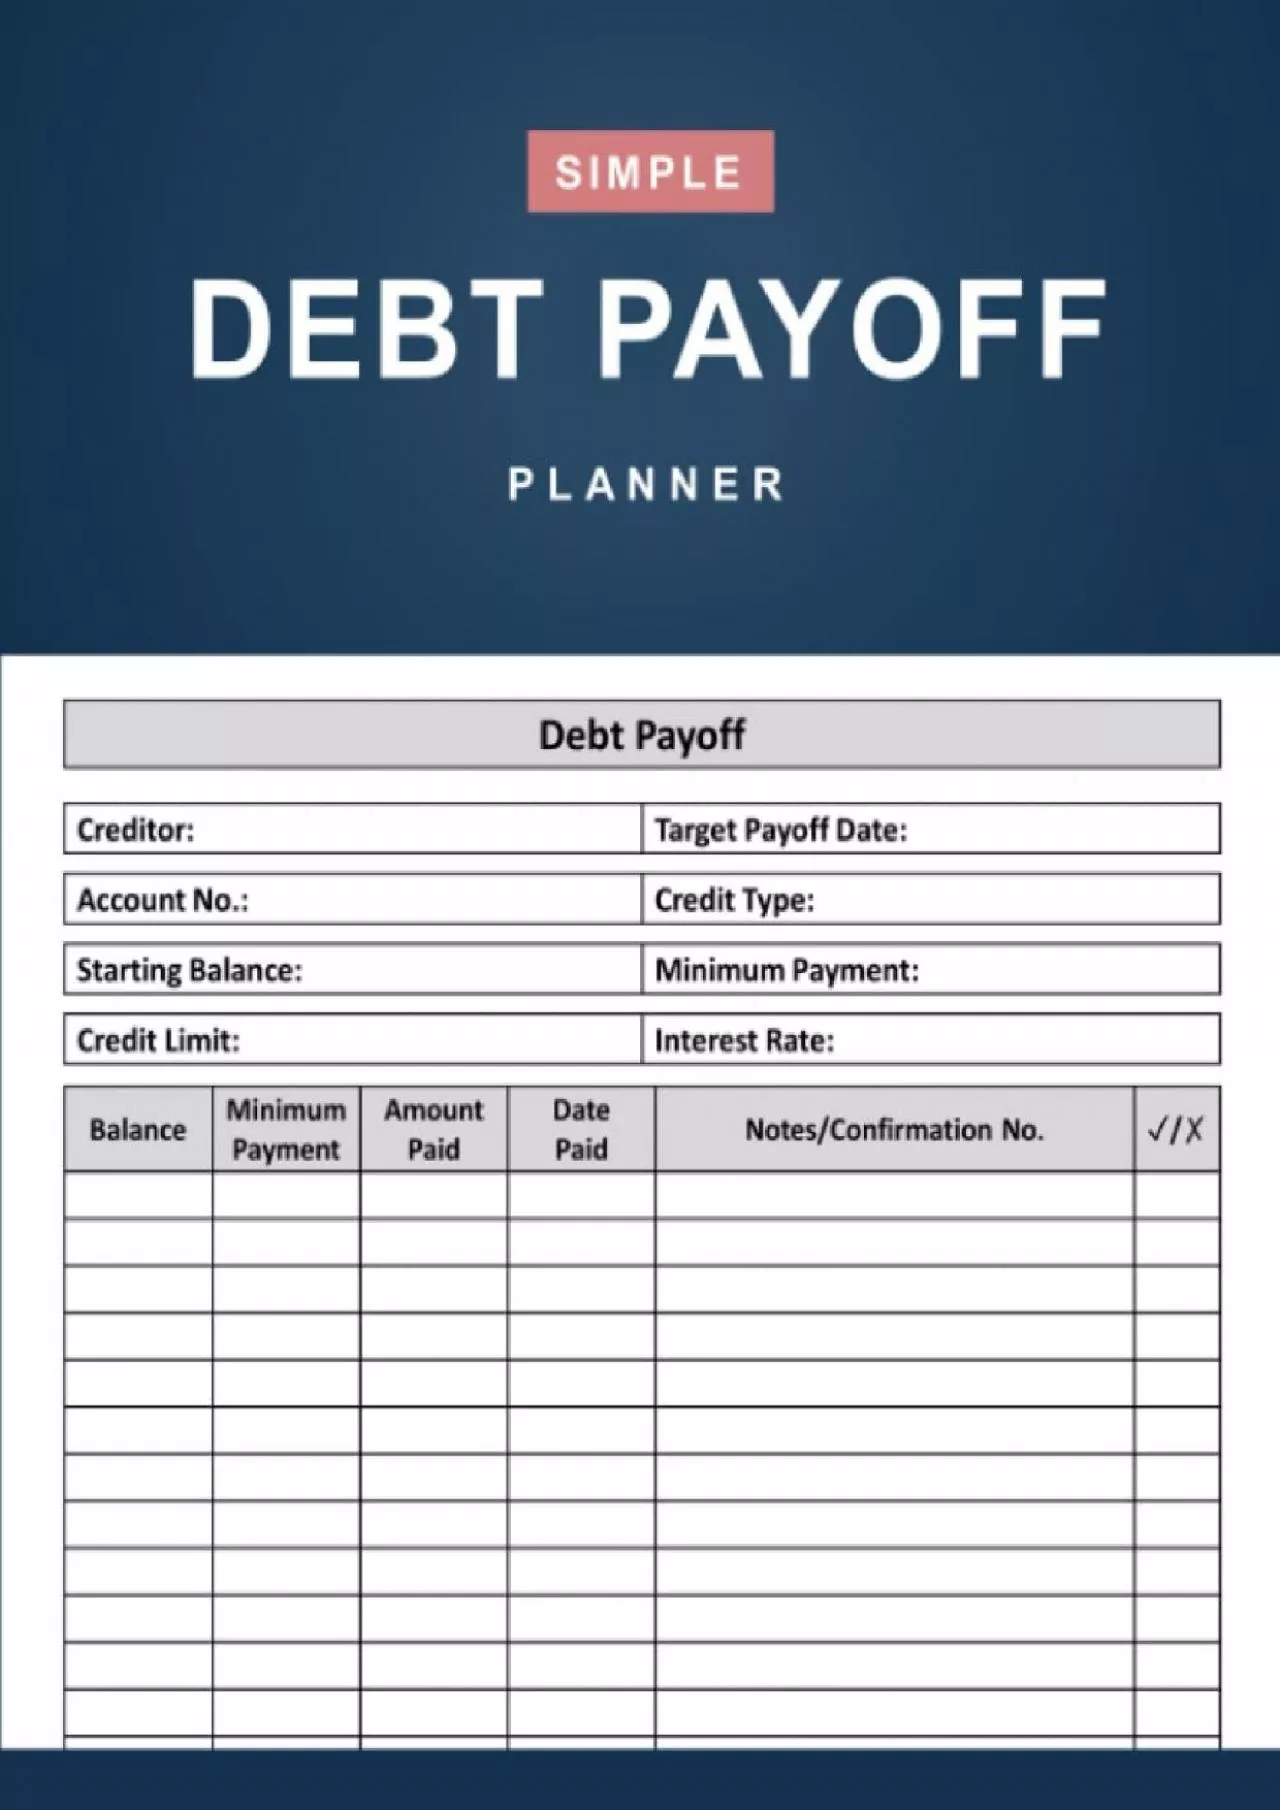 [eBOOK]-Debt Payoff Planner: Simple Debt Payoff Tracker: That Helps You Control Your Financial